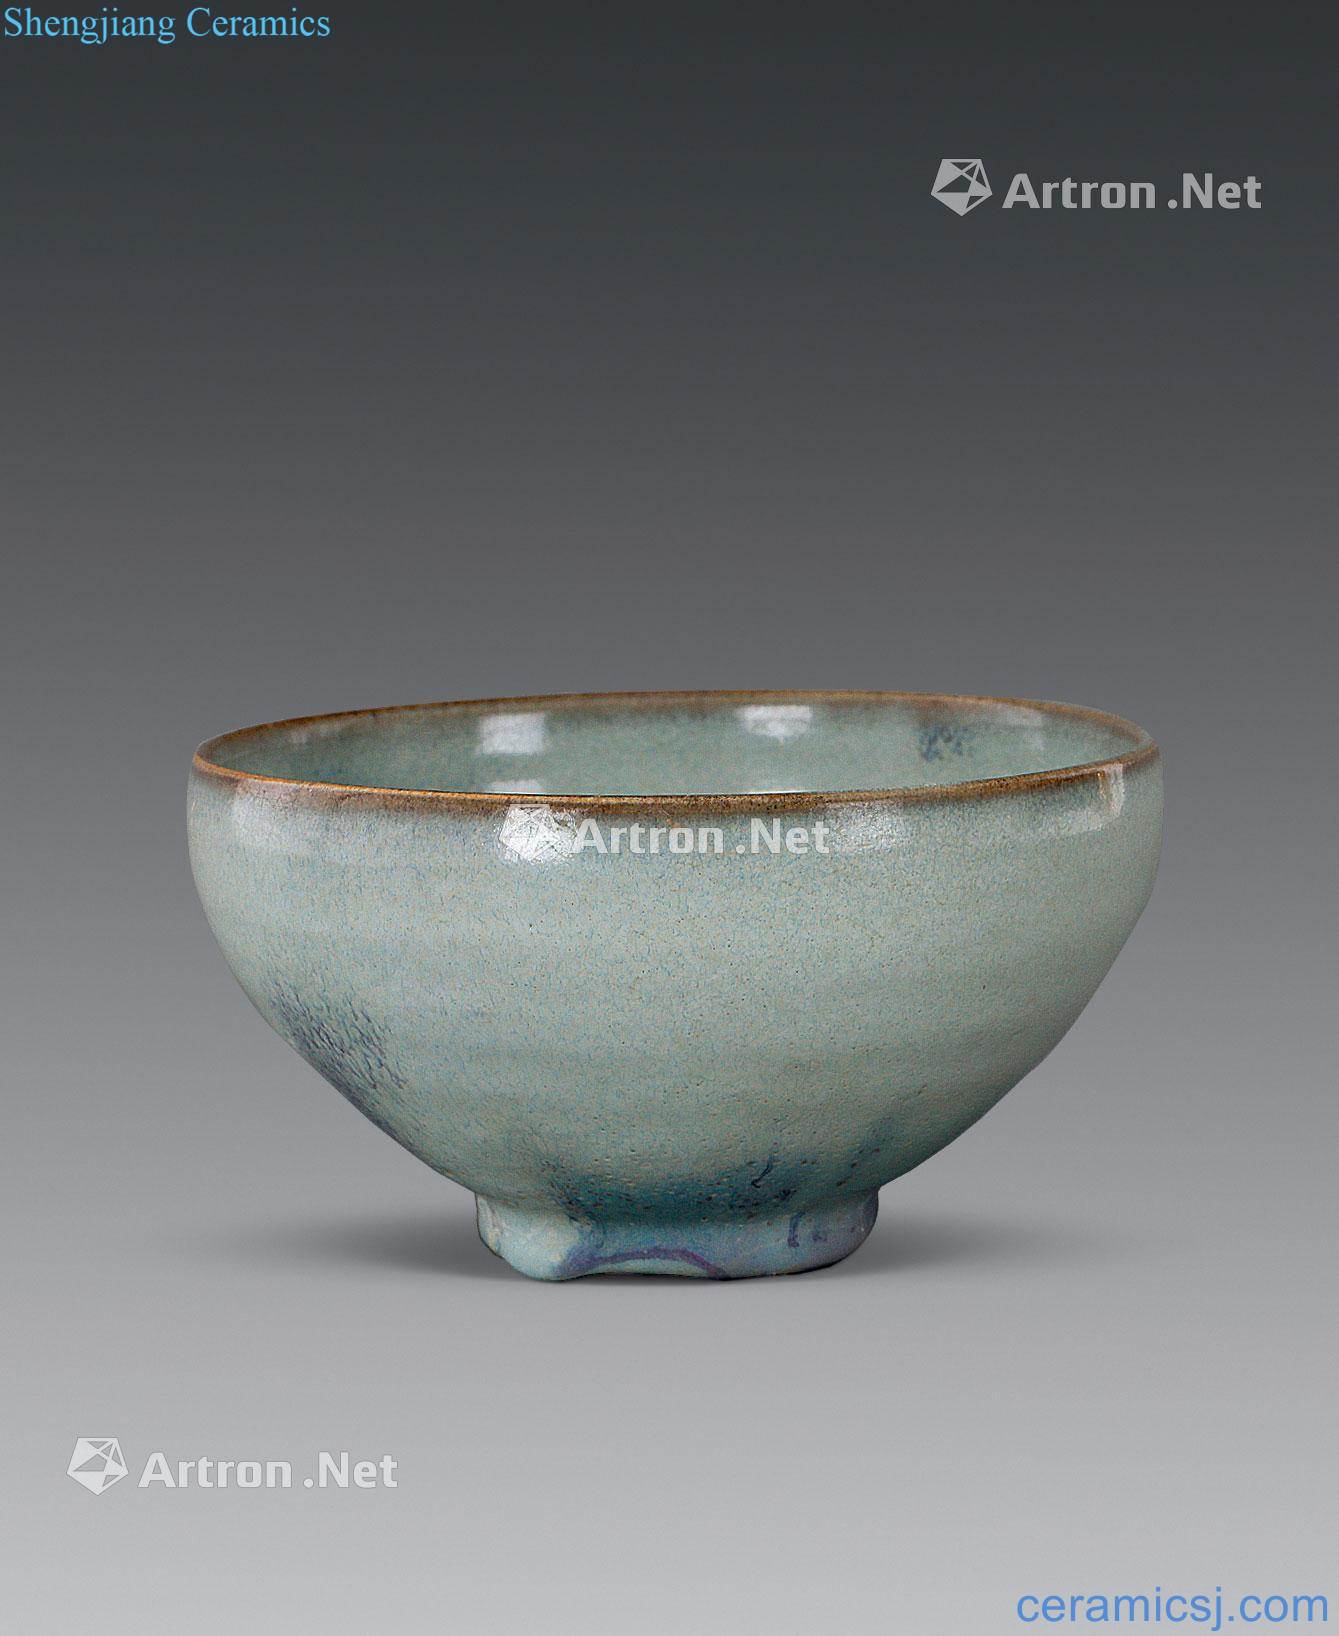 The qing bowl masterpieces